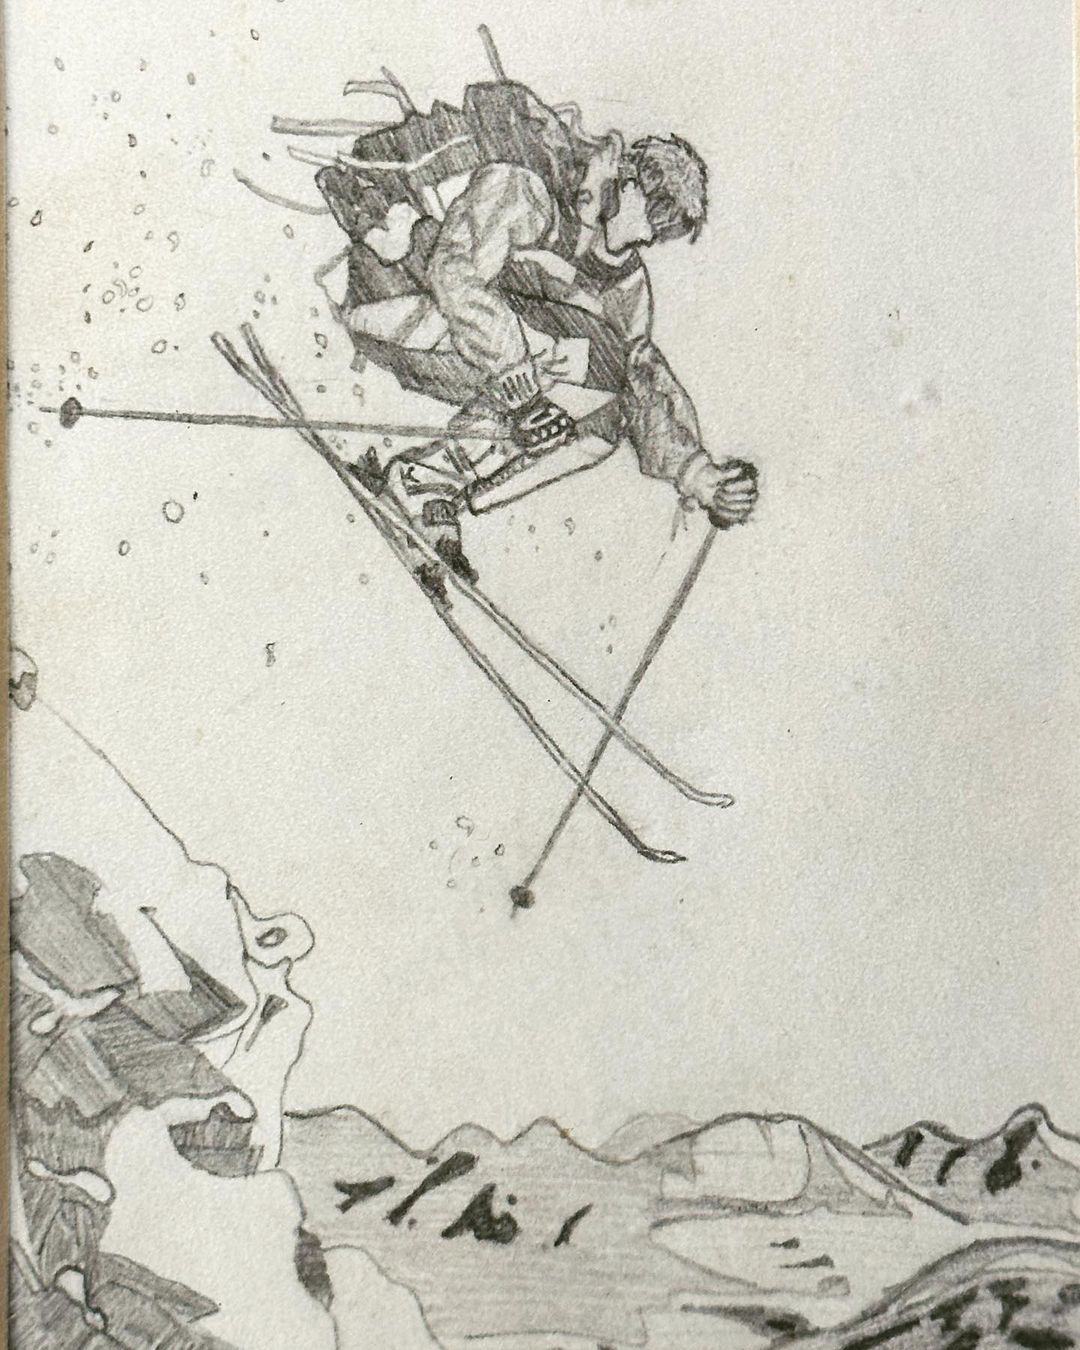 “Skiing steeps.” Pencil on paper. 1990s